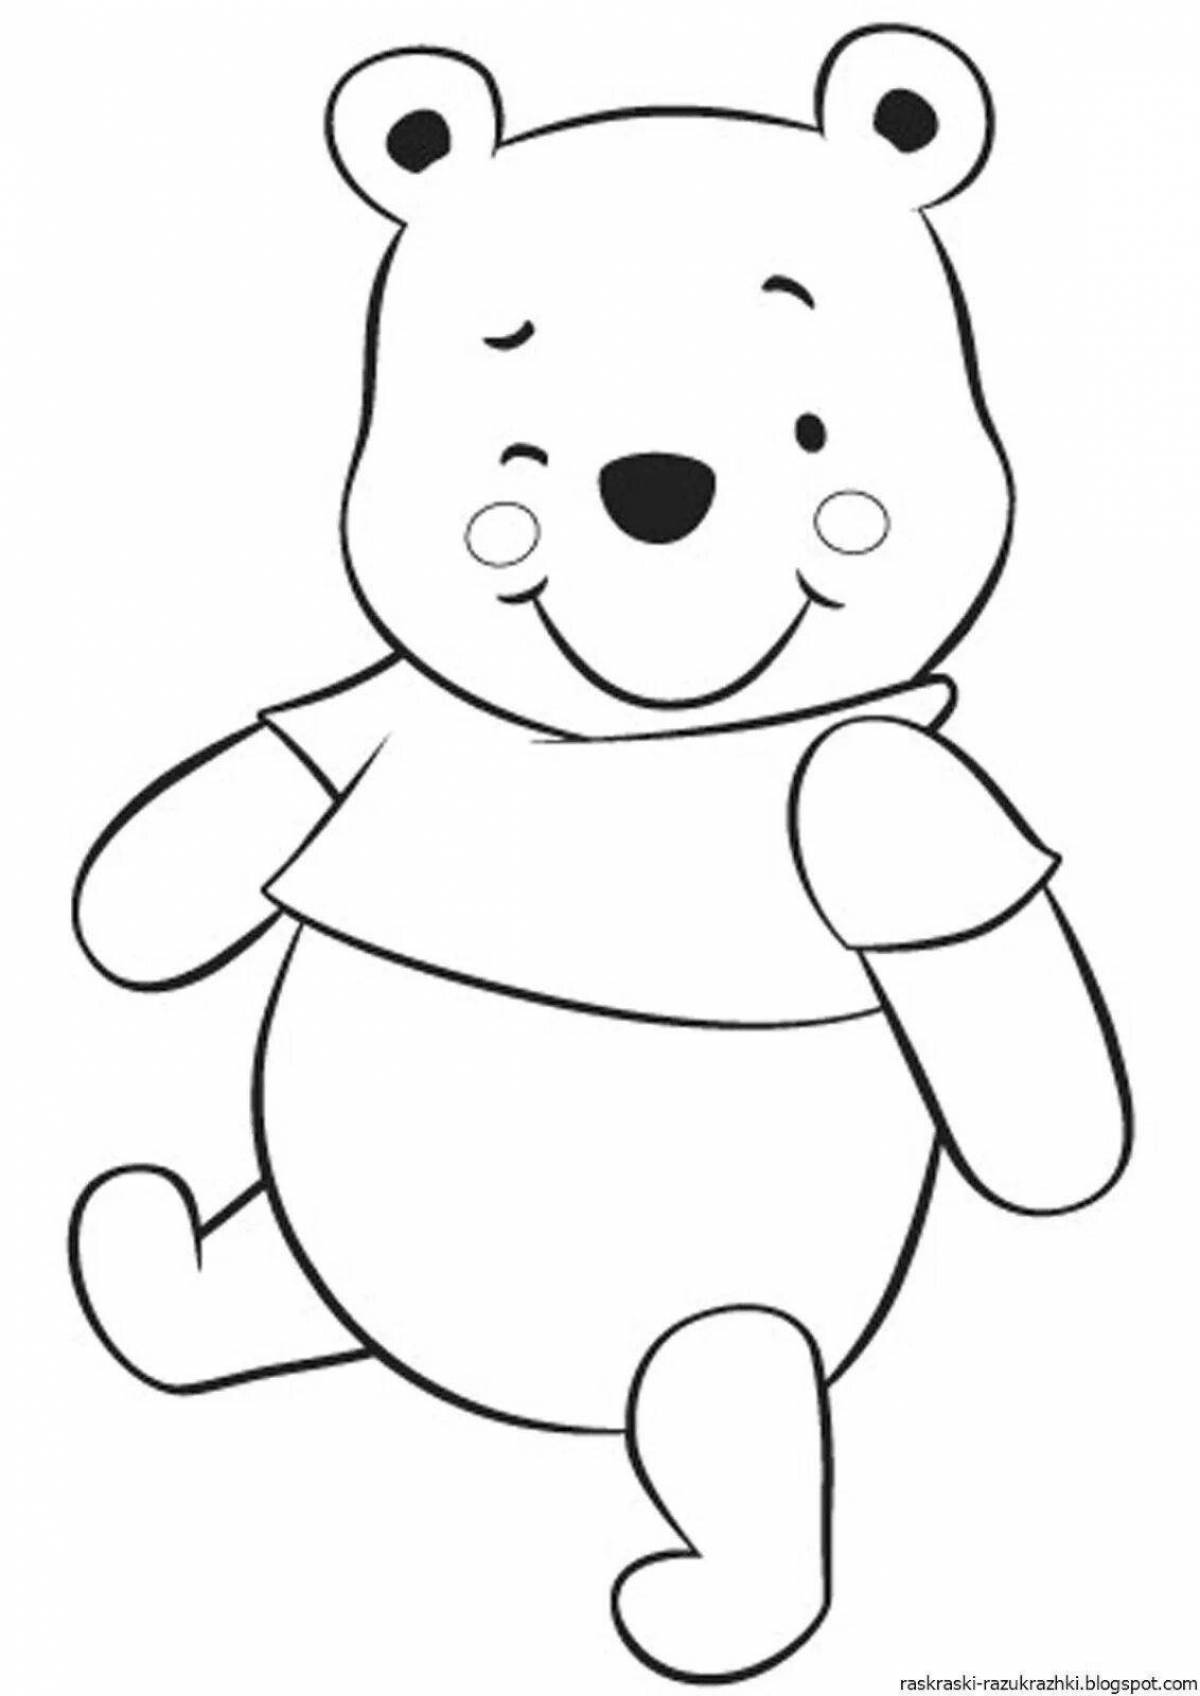 Coloring bear for children 3-4 years old